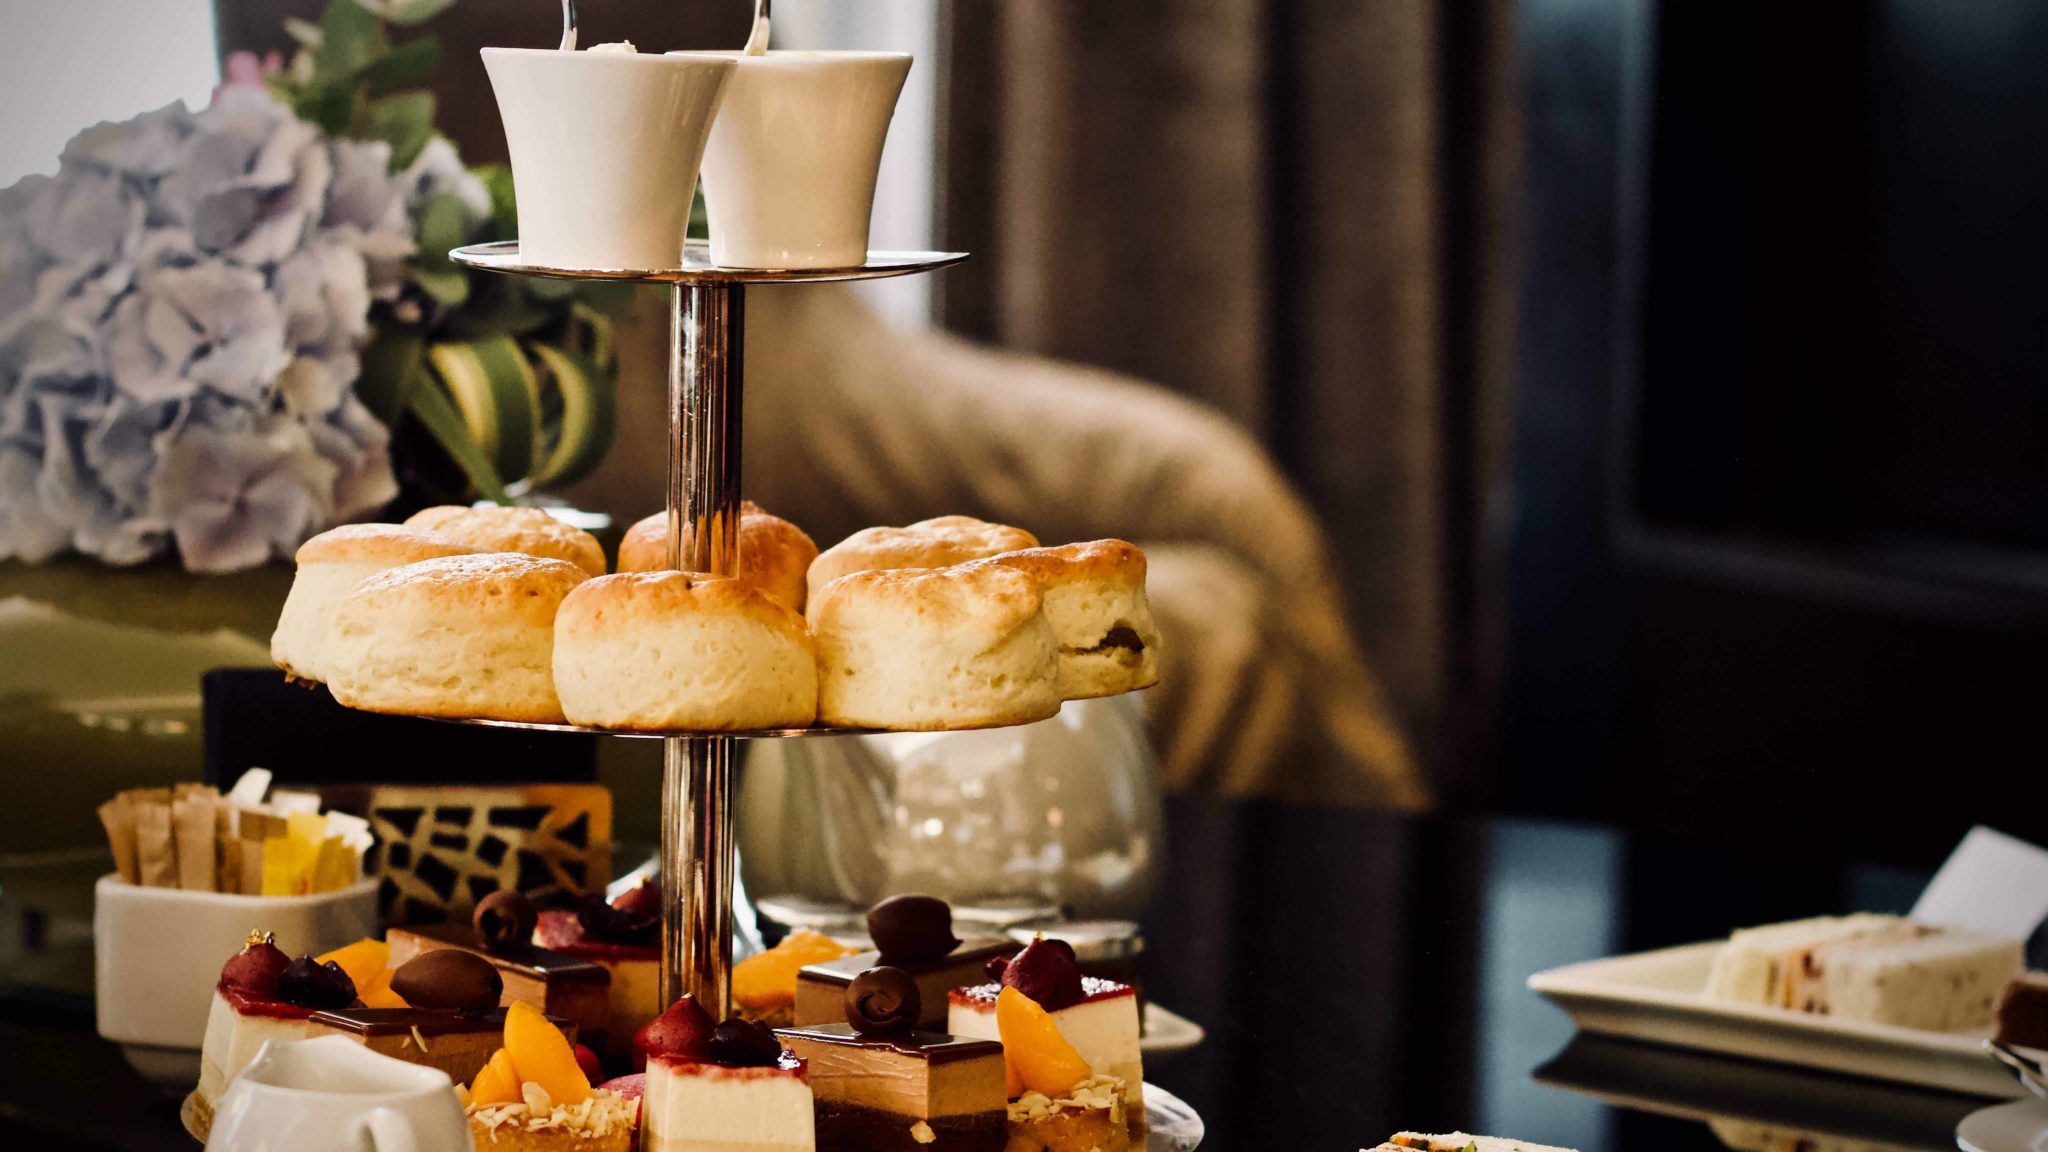 7 ideas for afternoon tea at home